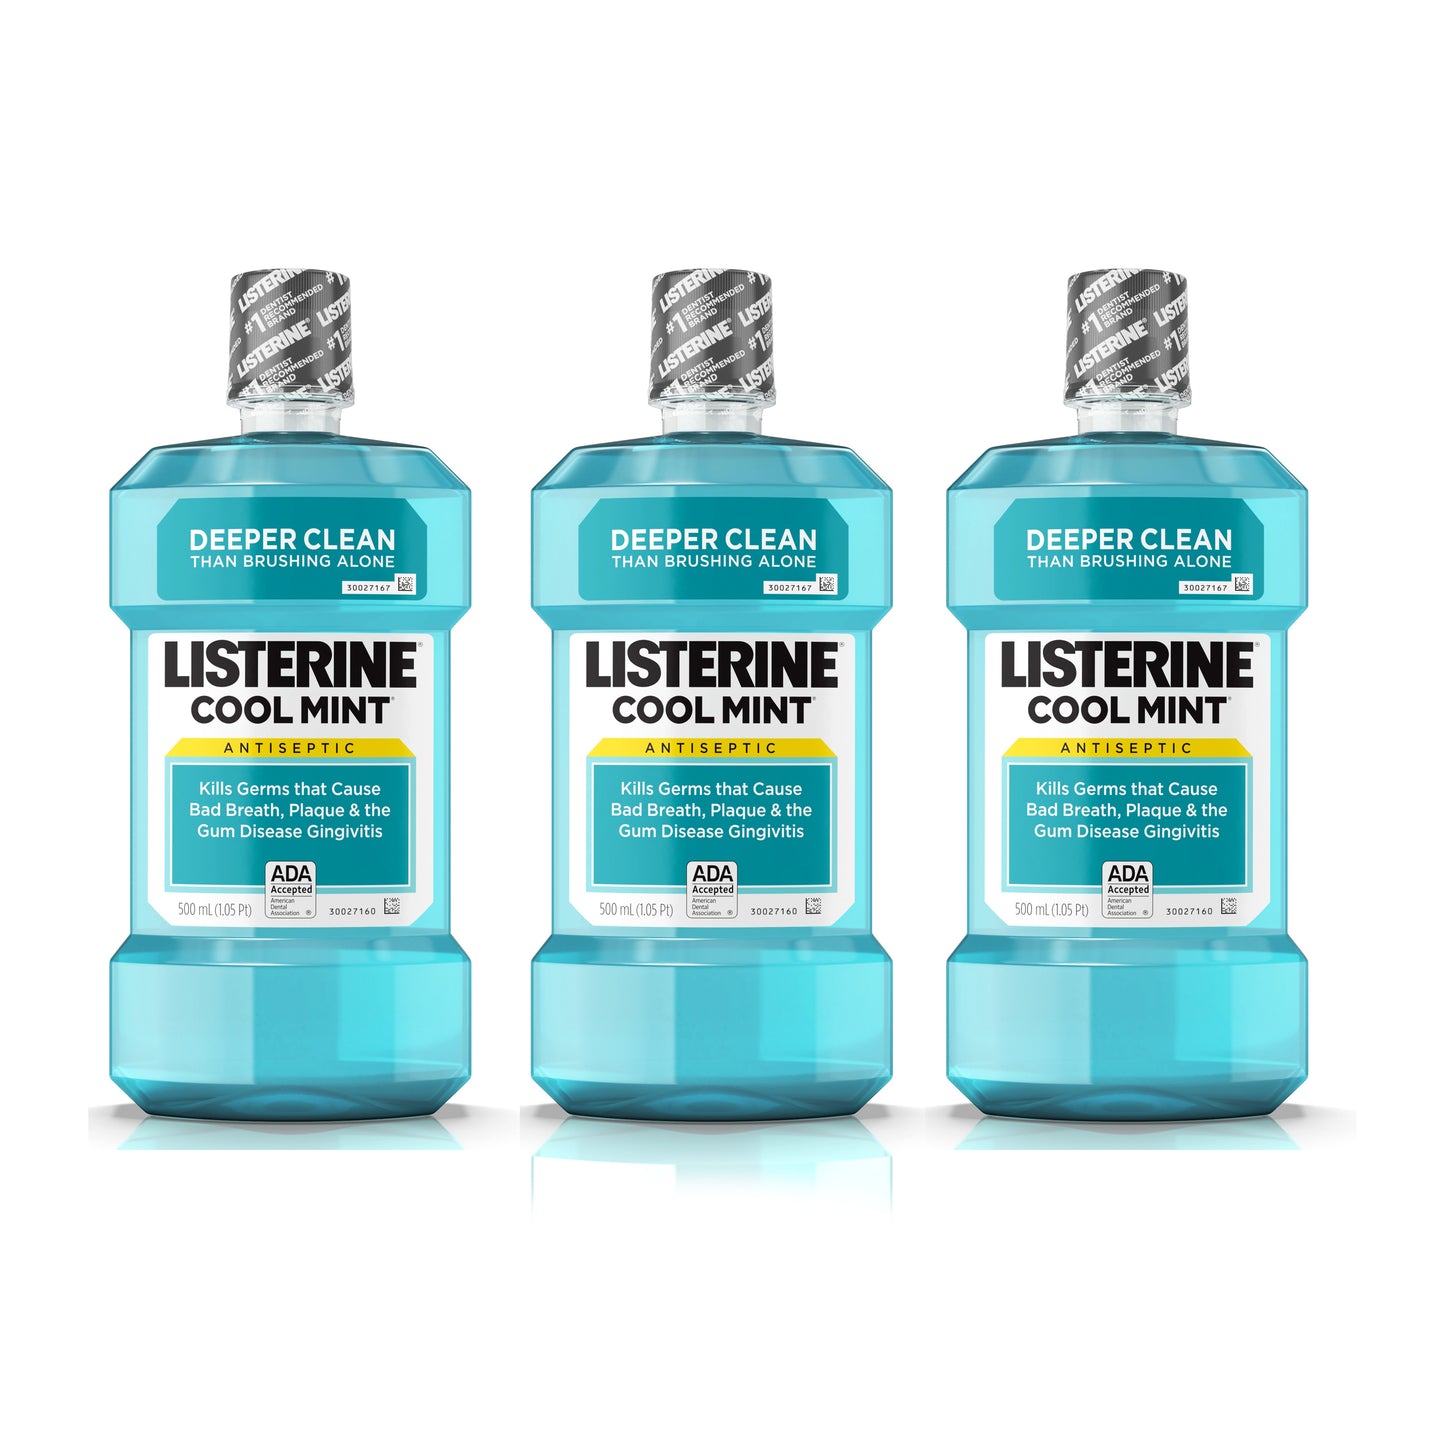 Listerine Cool Mint Antiseptic Mouthwash 500 ML "3-PACK"